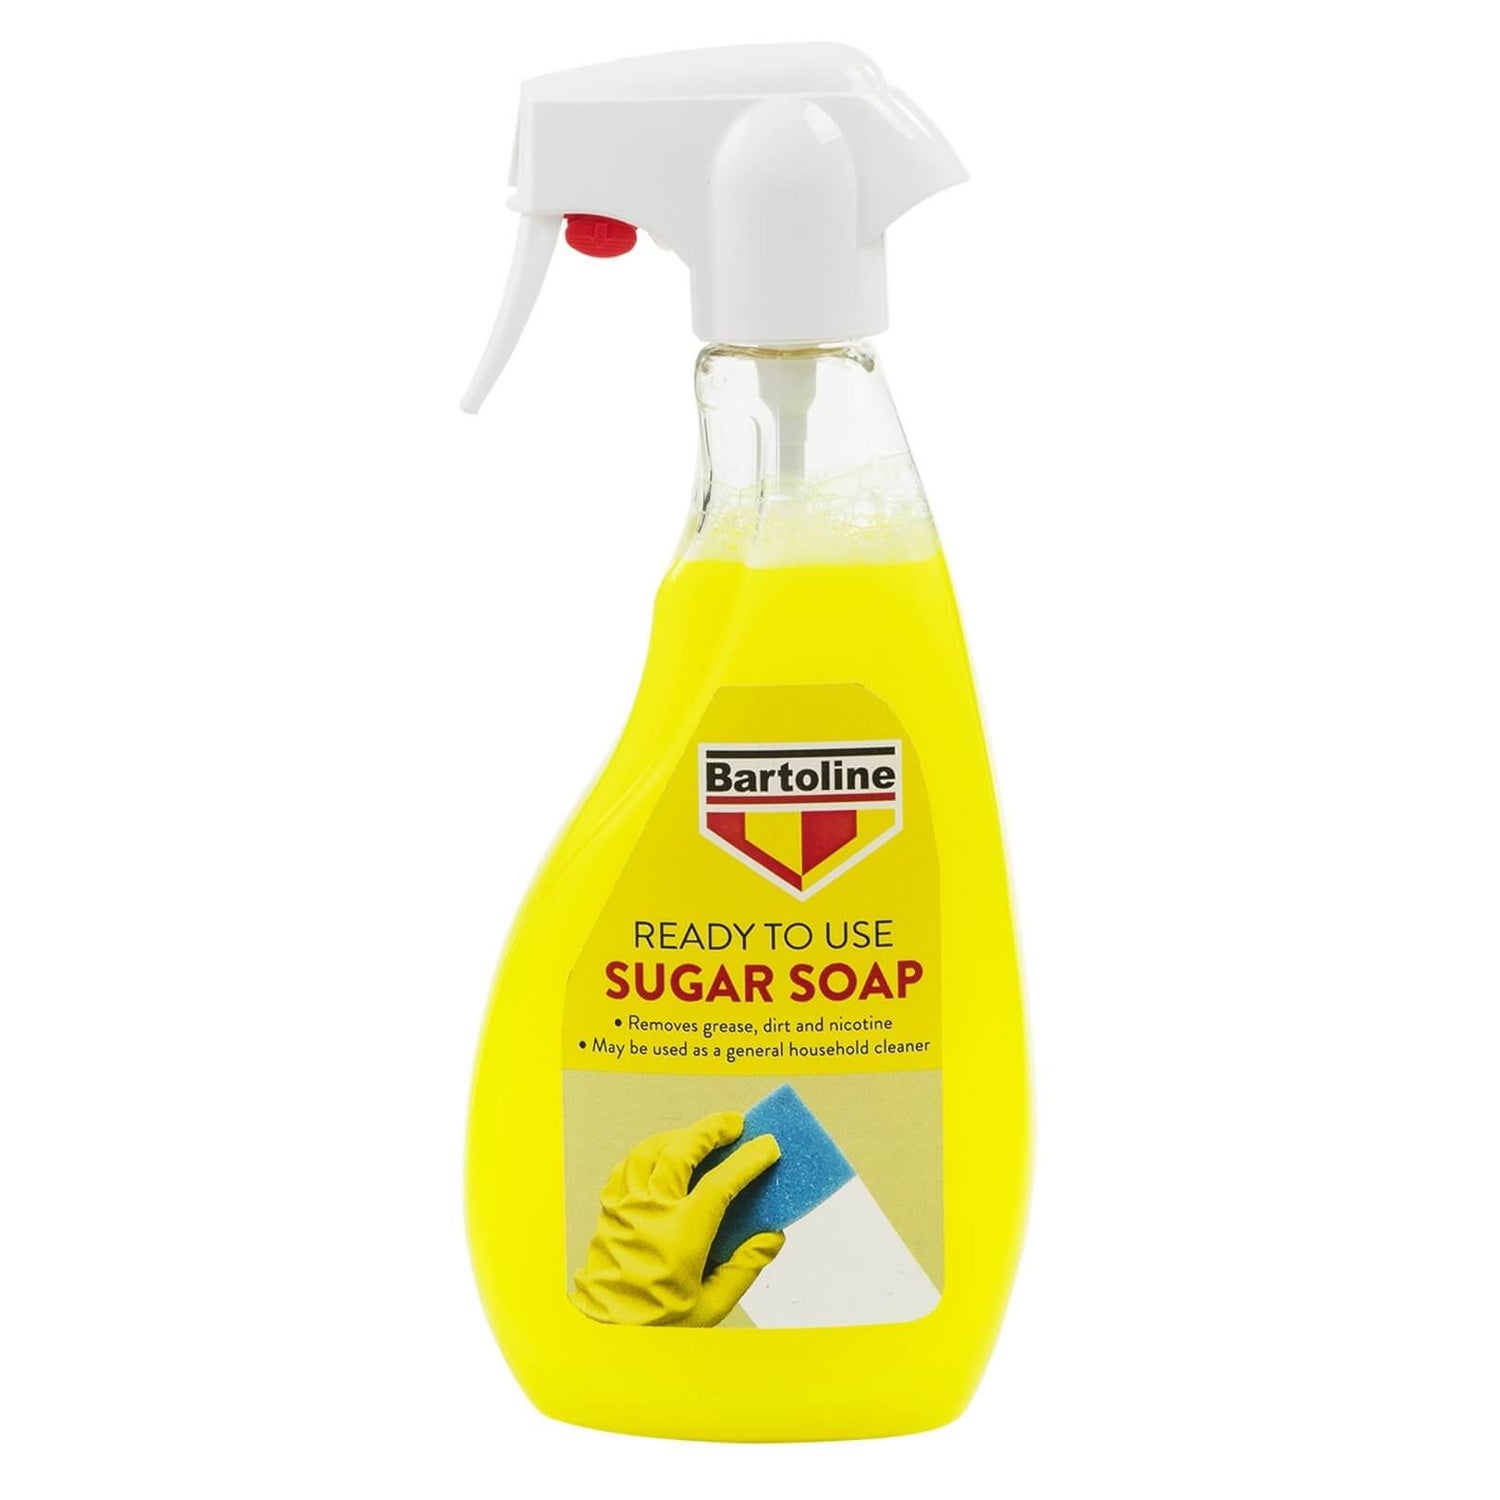 Home Base Shower Trigger Cleaner Liquid, Cleaning Supplies